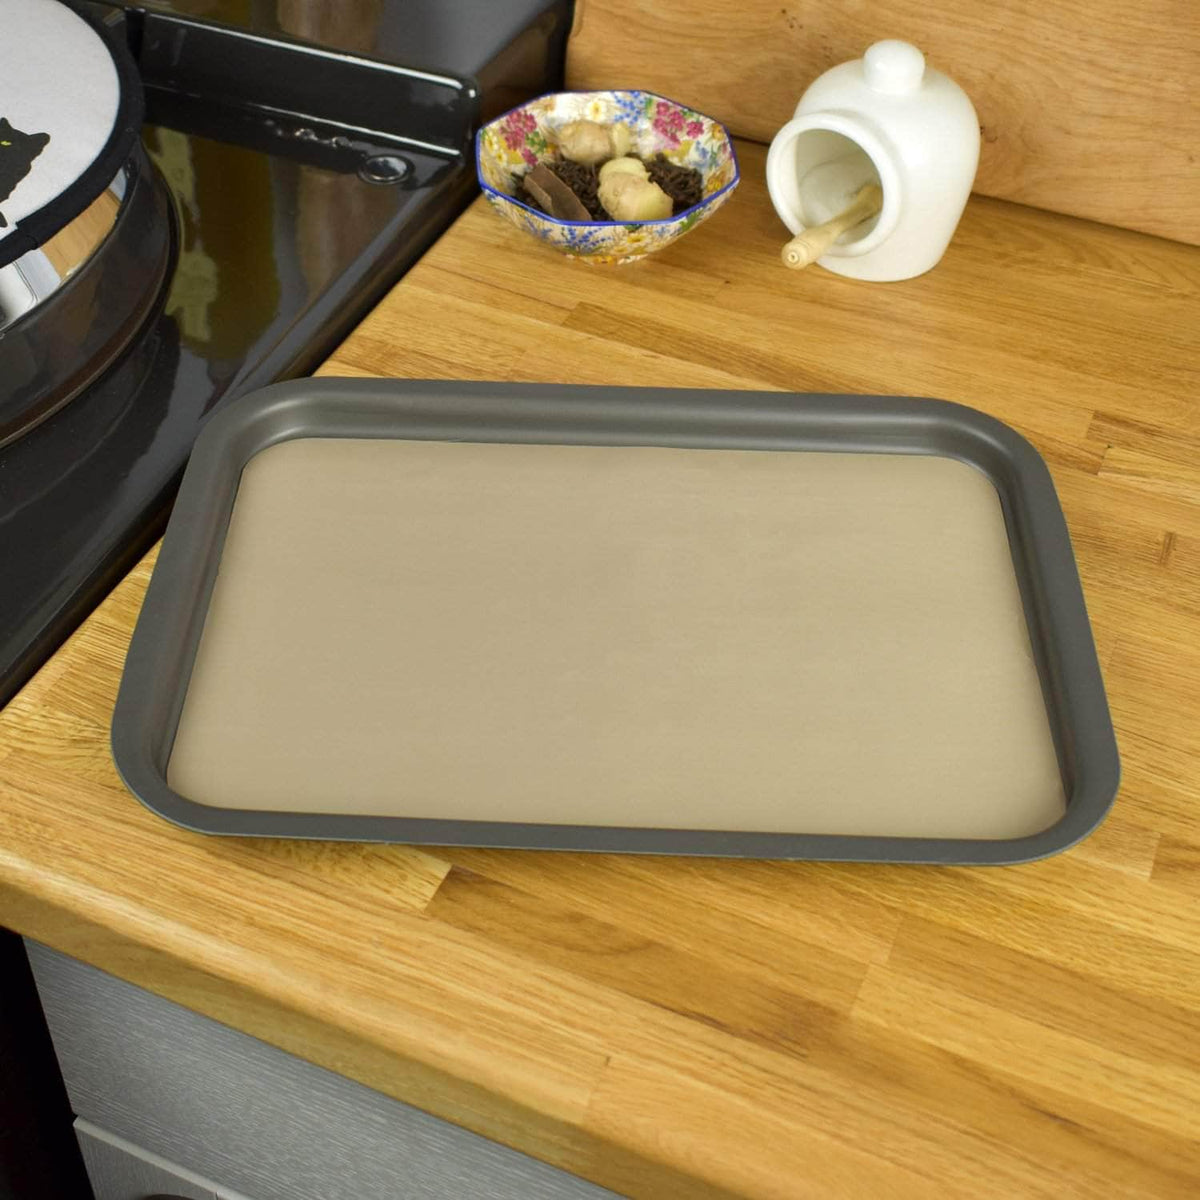 Complete roasting and baking tray non-stick liner set - The Full Monty! Save £7-10 on individual cost